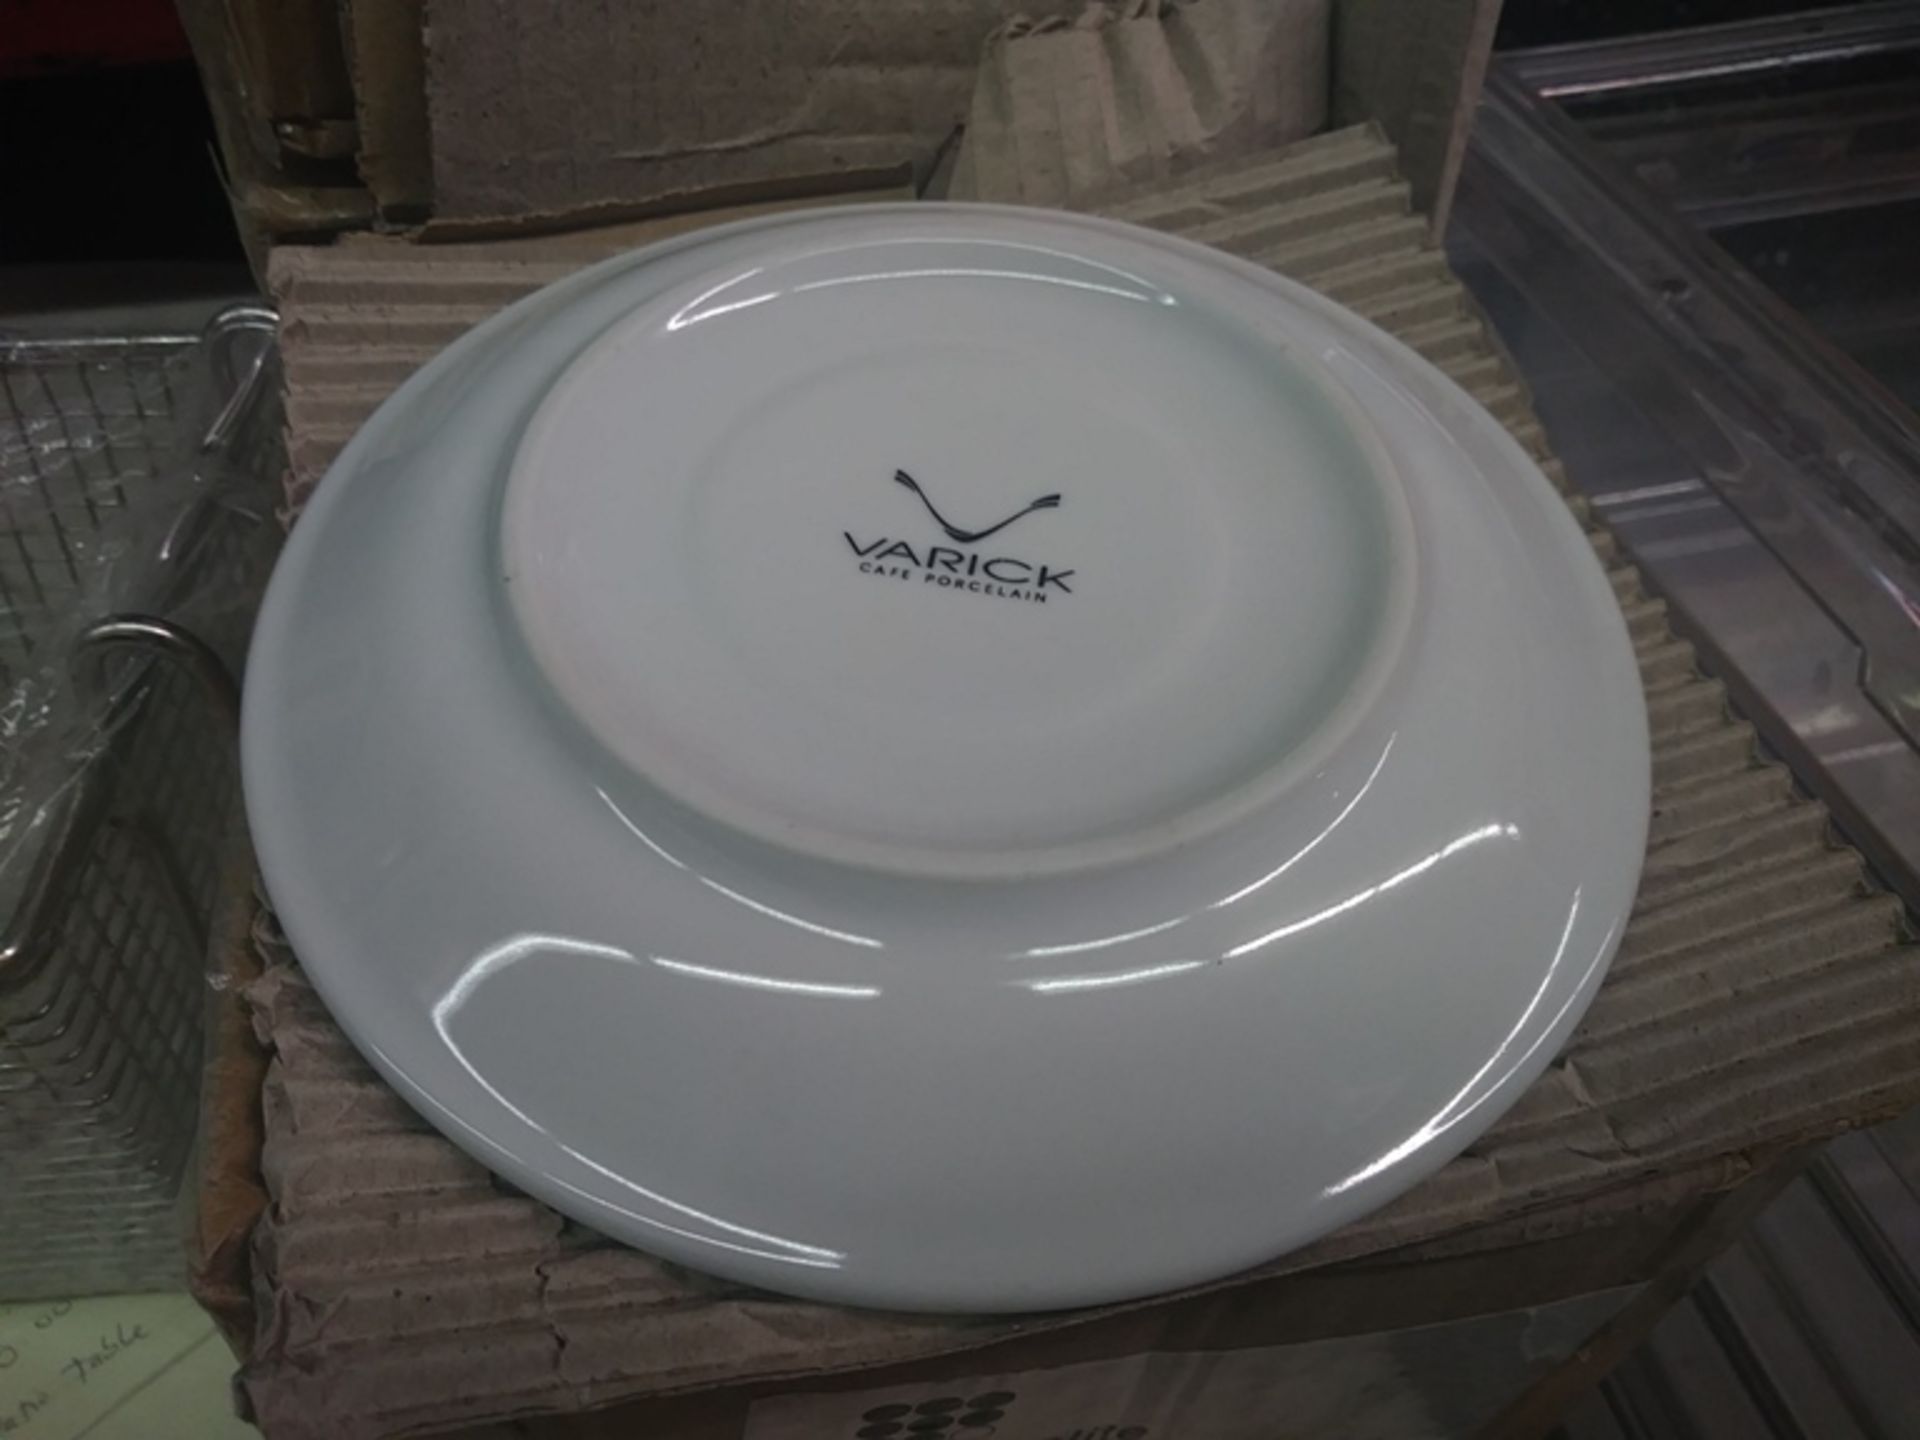 NEW 6" STEELITE DOUBLEWELL SAUCER (INCLUDES QTY 72) - Image 2 of 4